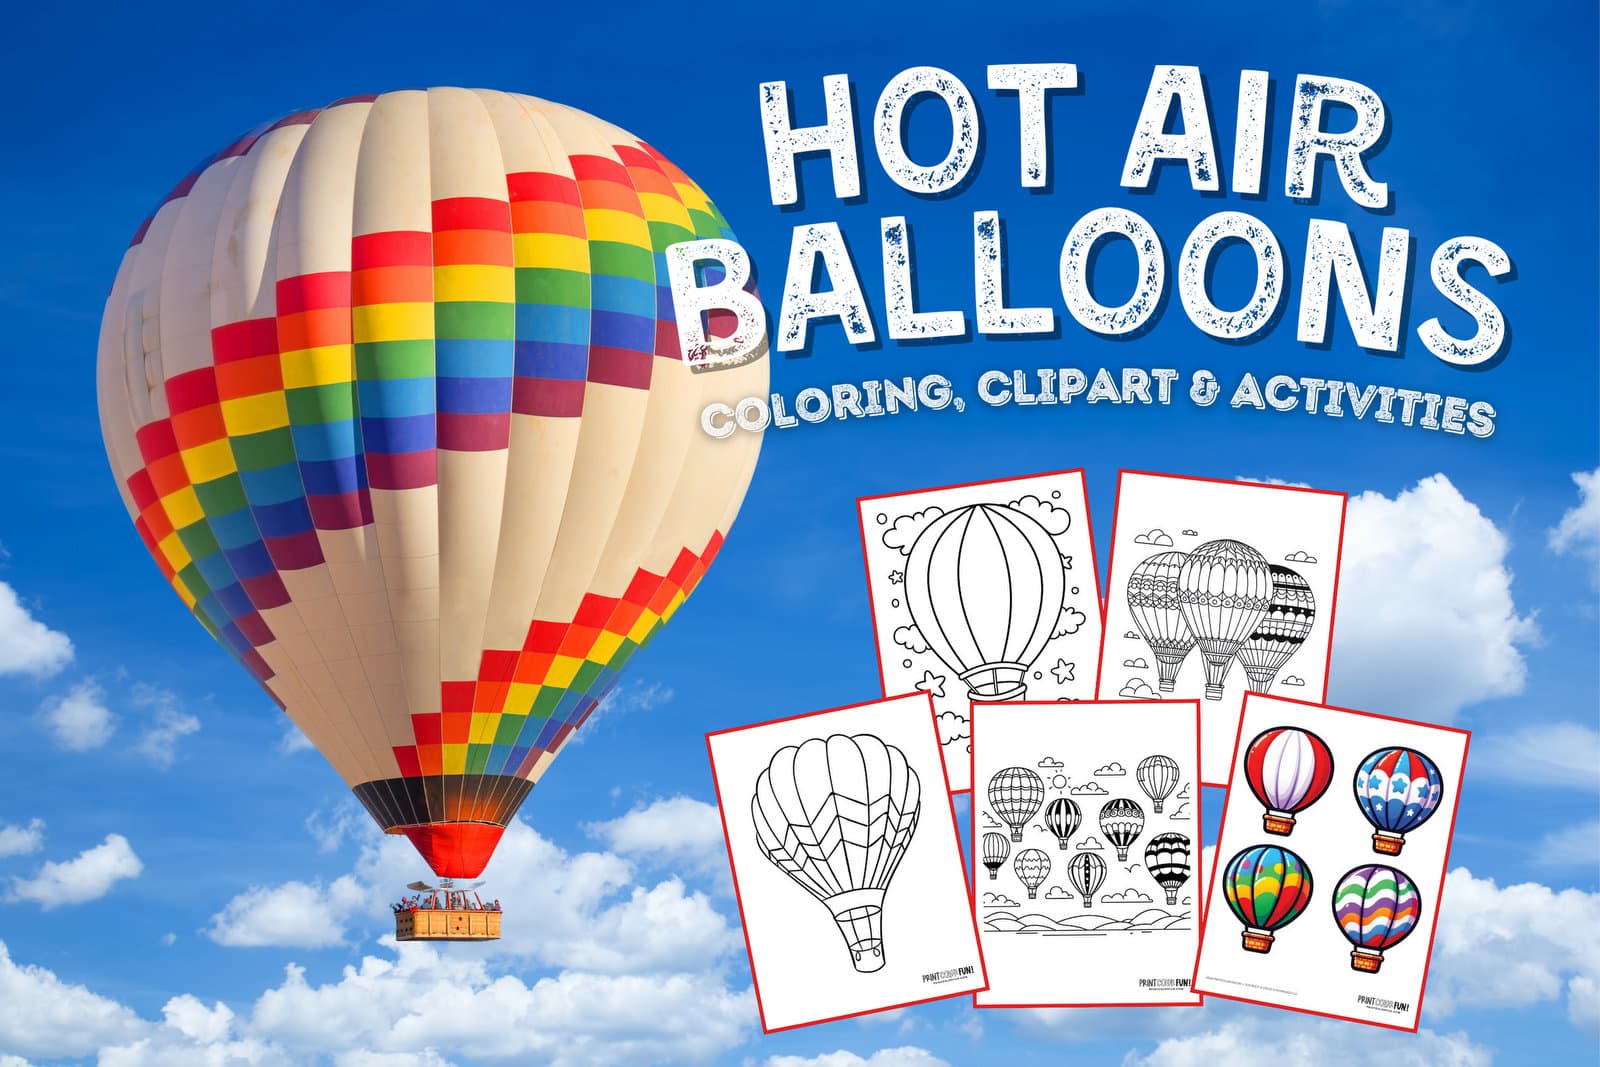 Hot air balloon coloring page clipart activities from PrintColorFun com